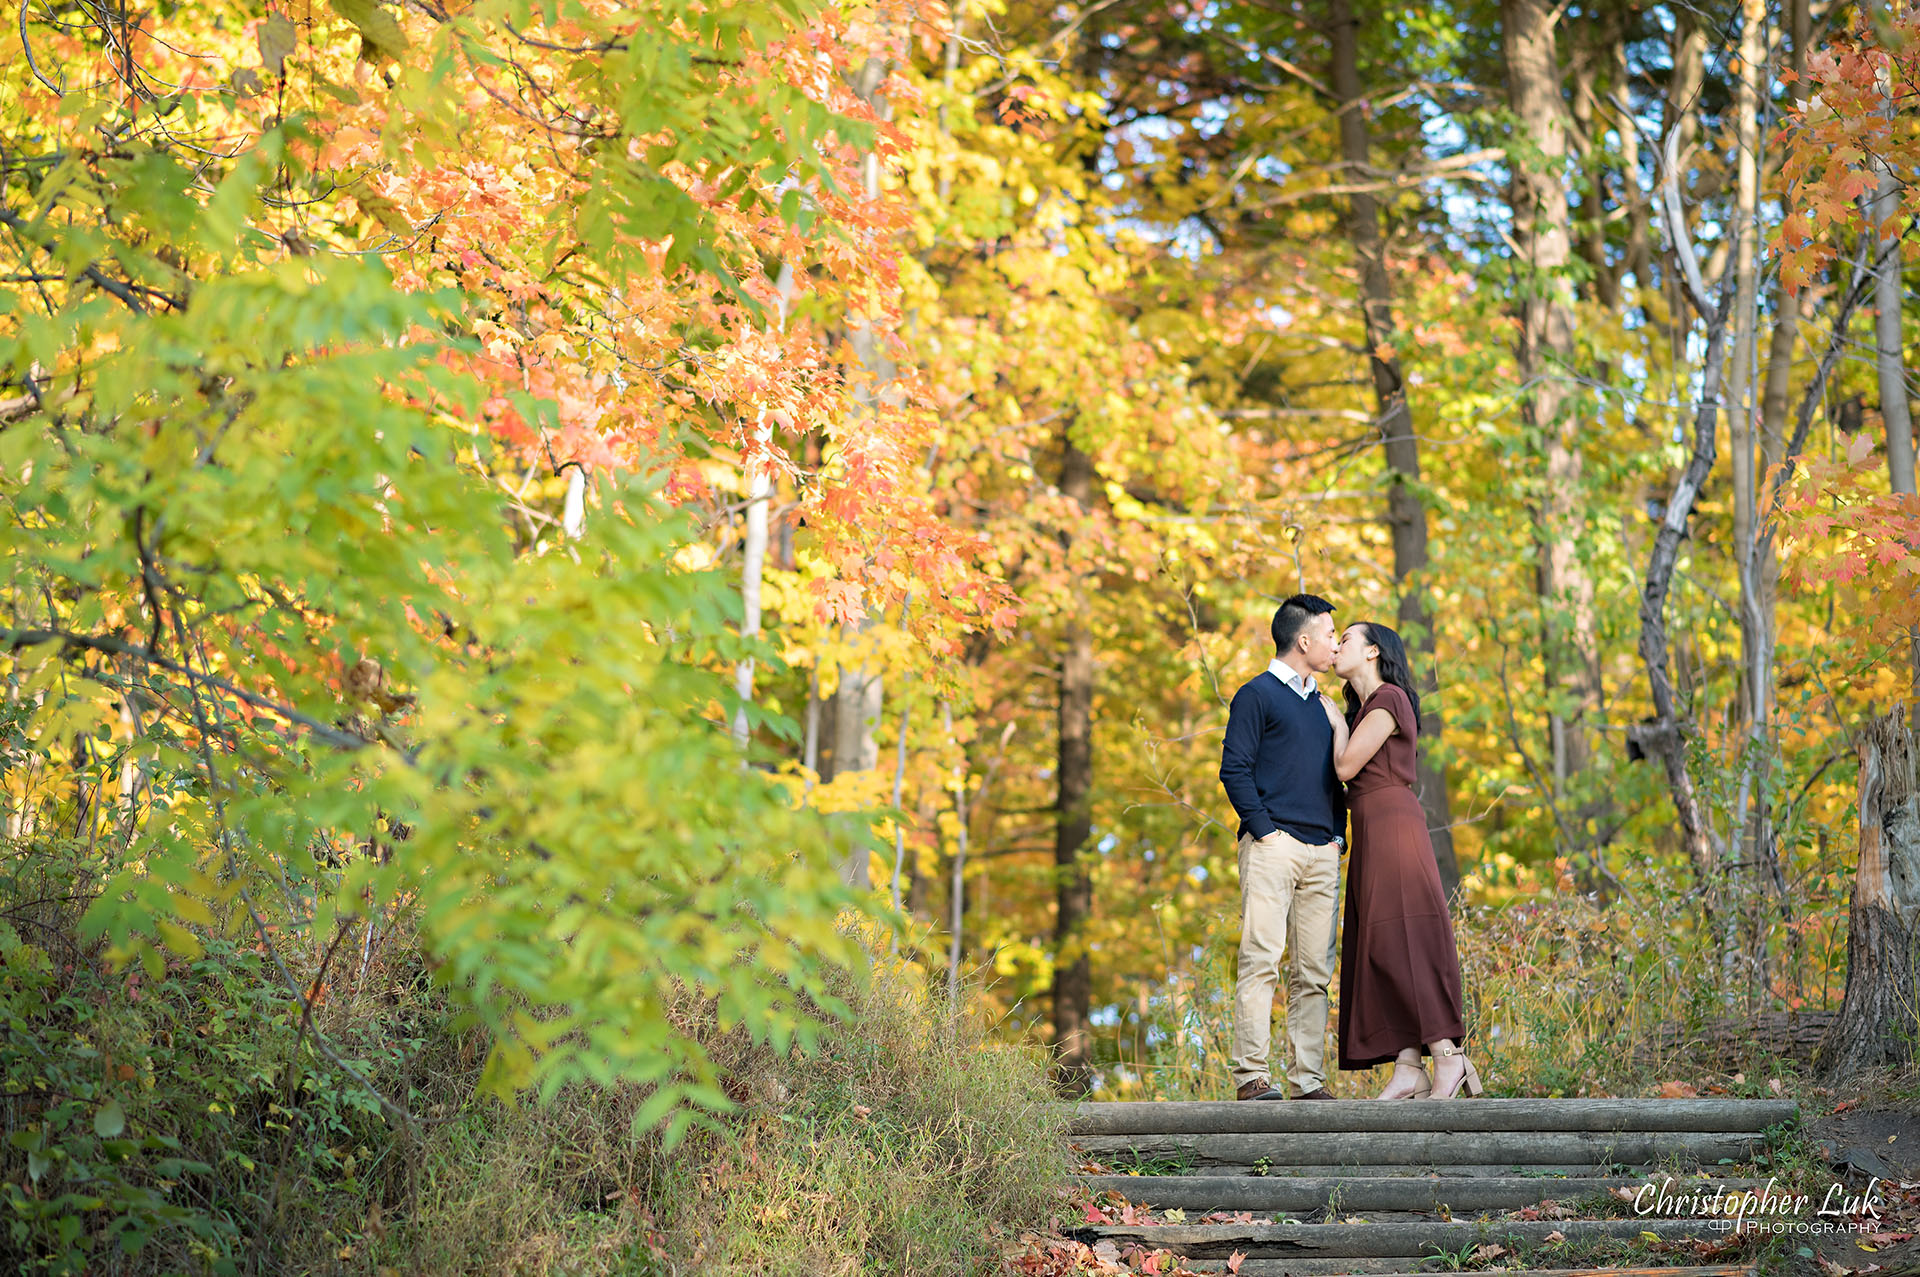 Christopher Luk Toronto Wedding Engagement Session Photographer Autumn Fall Leaves Natural Candid Photojournalistic Bride Groom Hiking Trail Trees Hug Holding Each Other Together Orange Red Yellow Kiss Wood Wooden Stairs Staircase Hiking Trail Steps